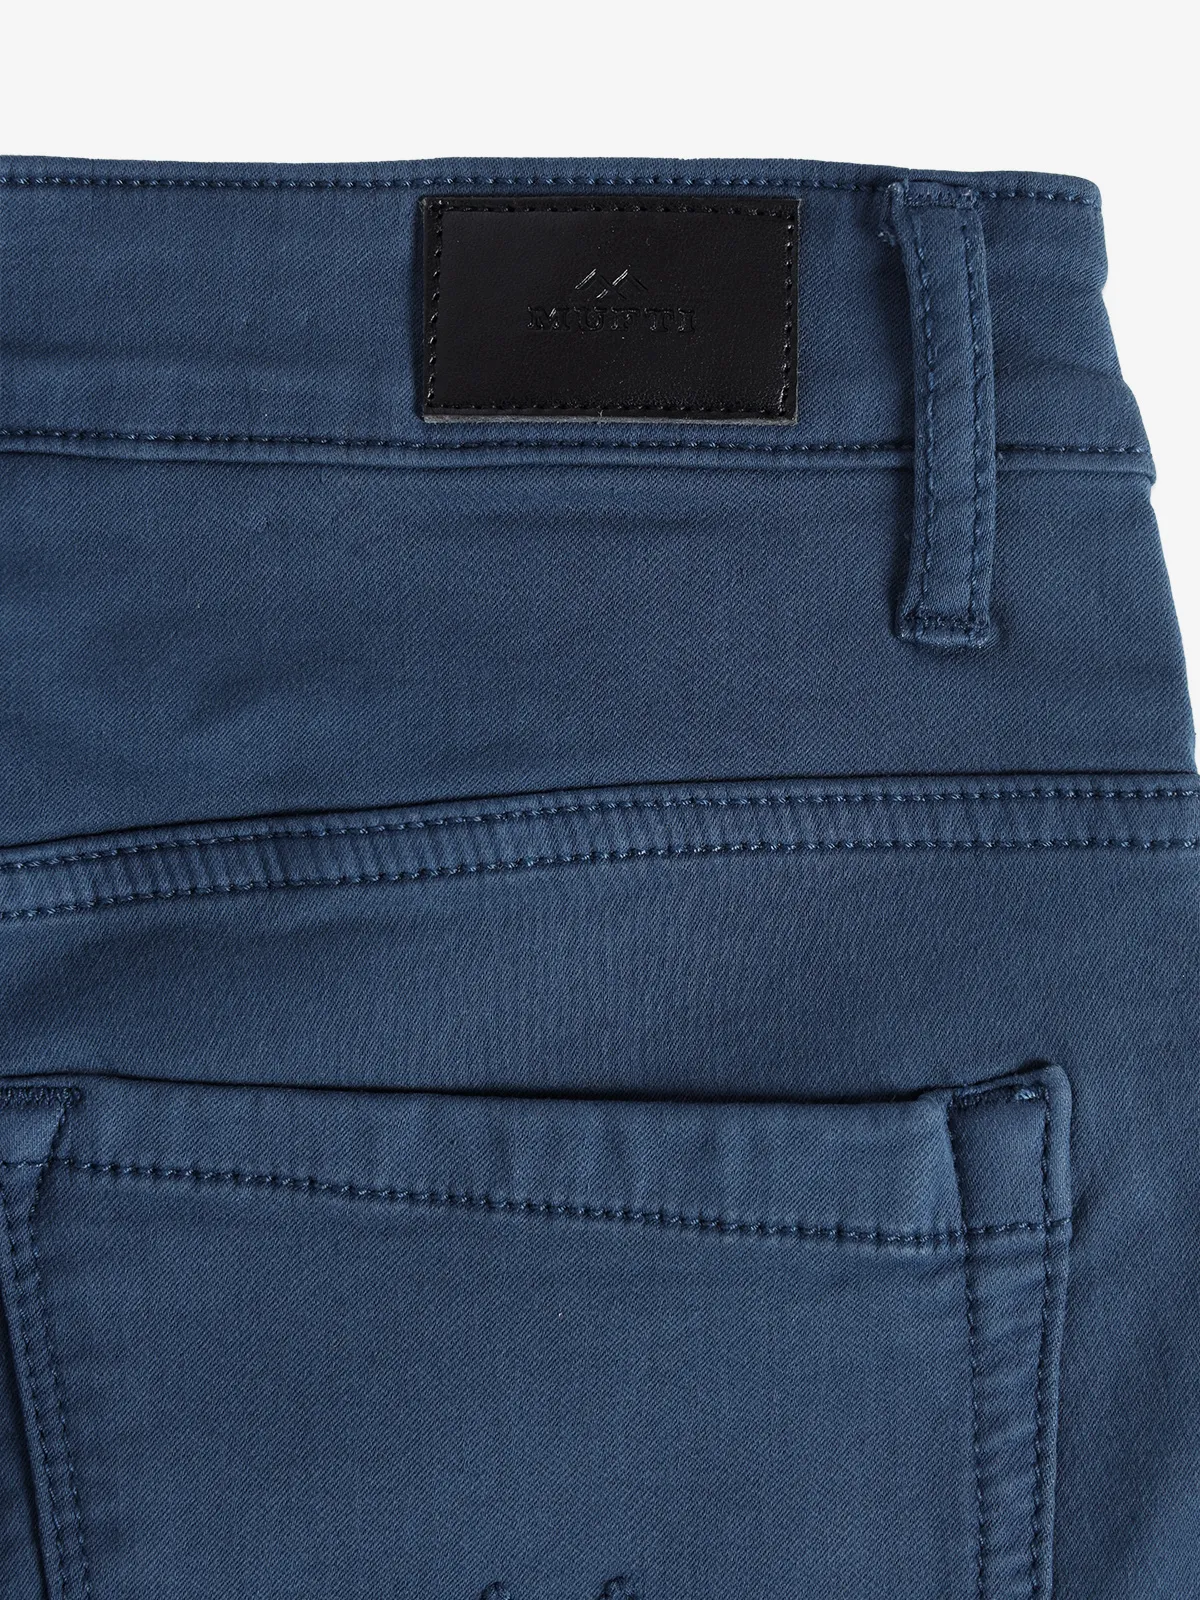 MUFTI blue solid skinny fit jeans